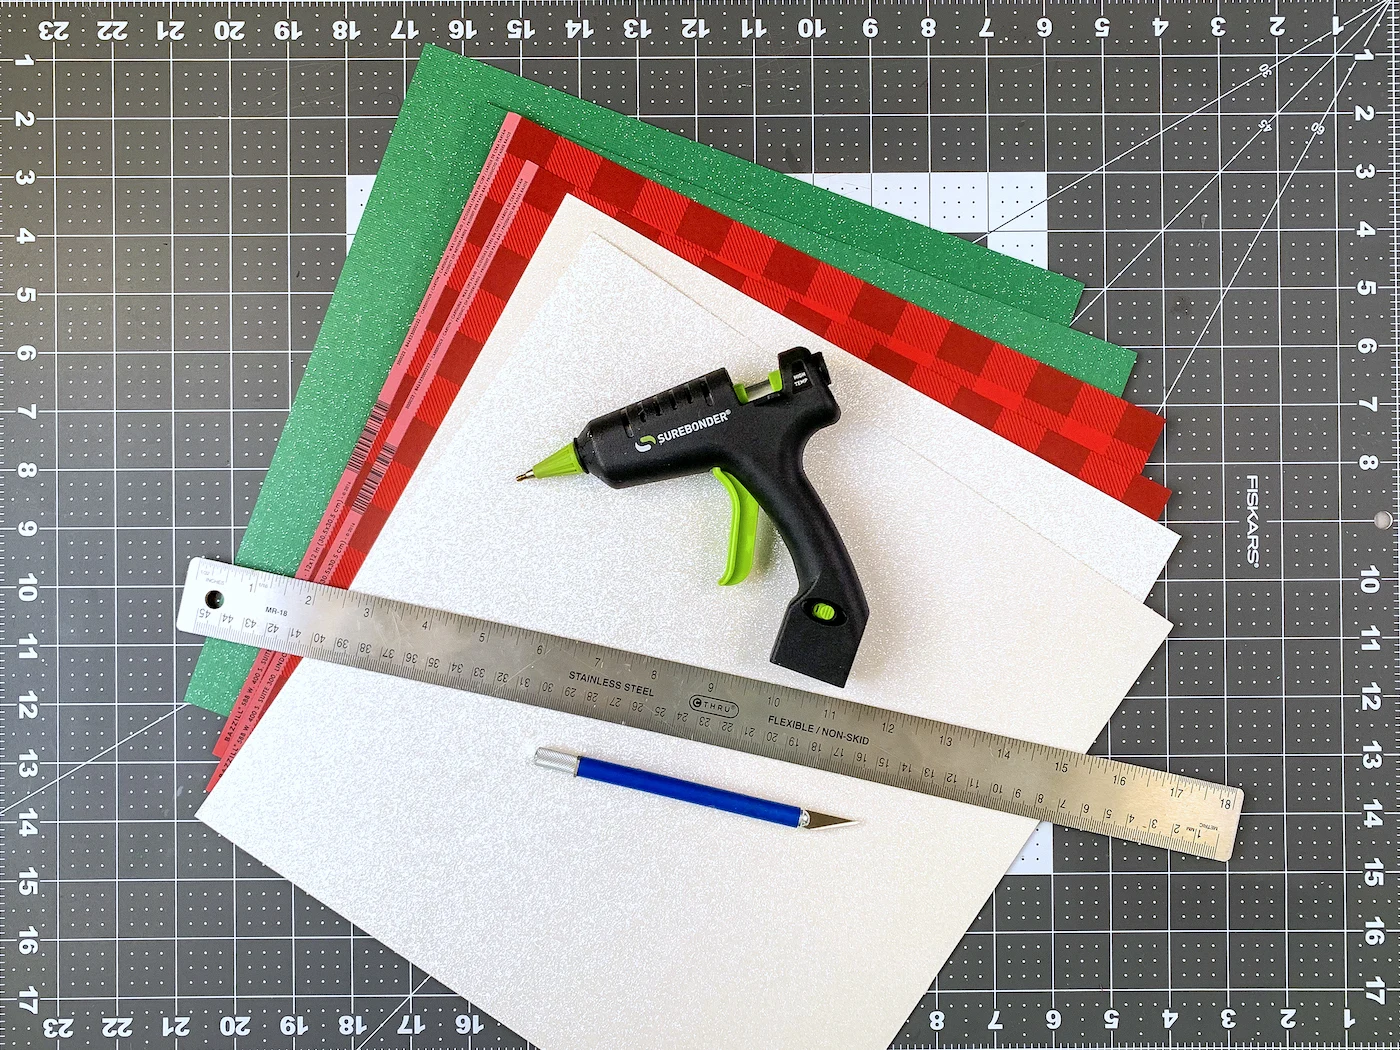 Christmas cardstock, hot glue, ruler, and a craft knife